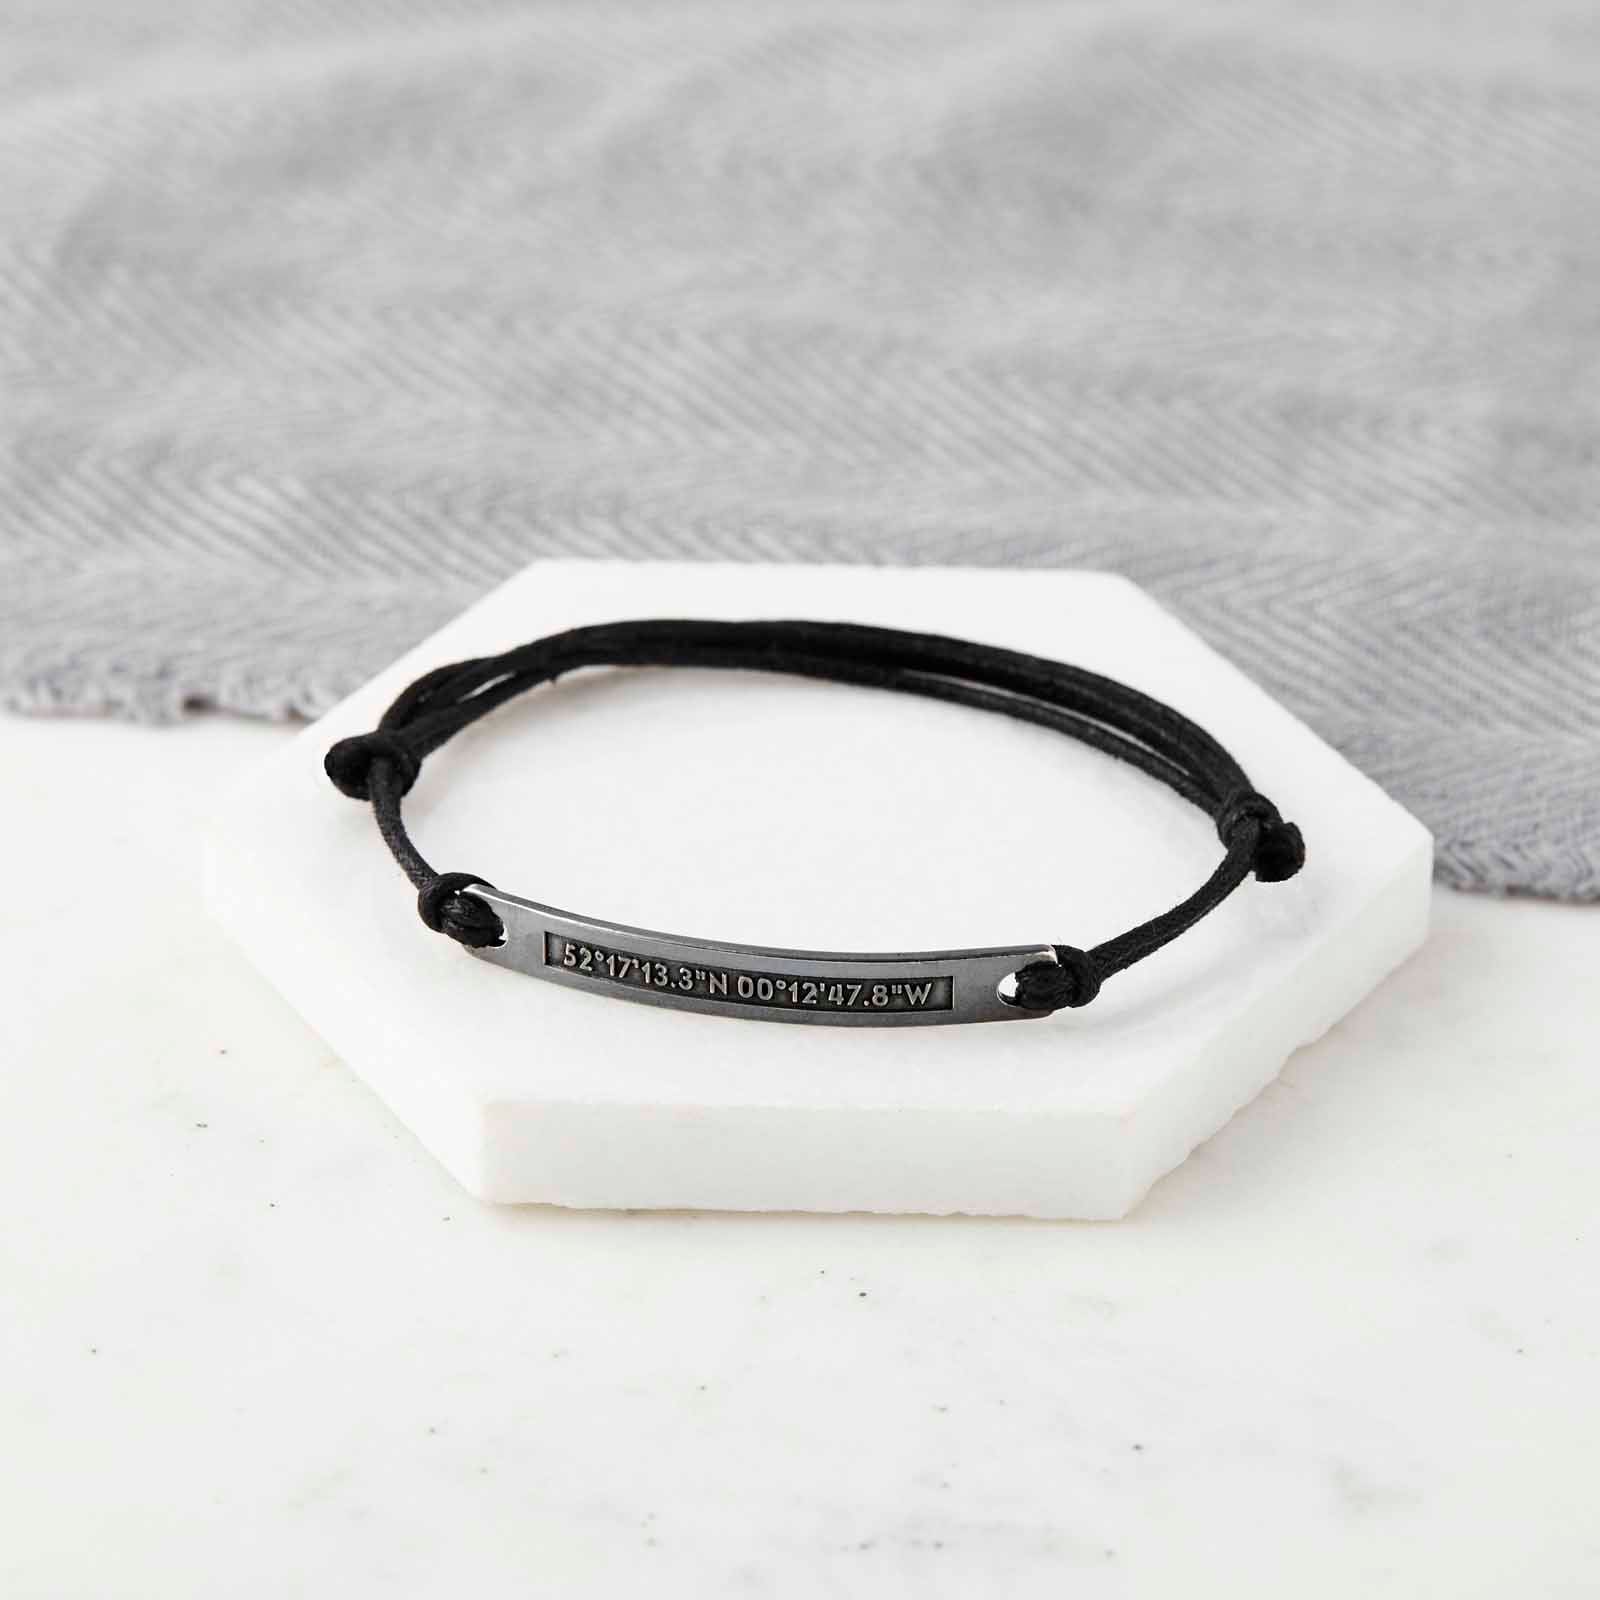 Amazon.com: Custom Coordinate Bracelet, Silver and Black Leather Cuff for  Men, compass & Latitude Longitude, GPS Location, gift for Him : Handmade  Products